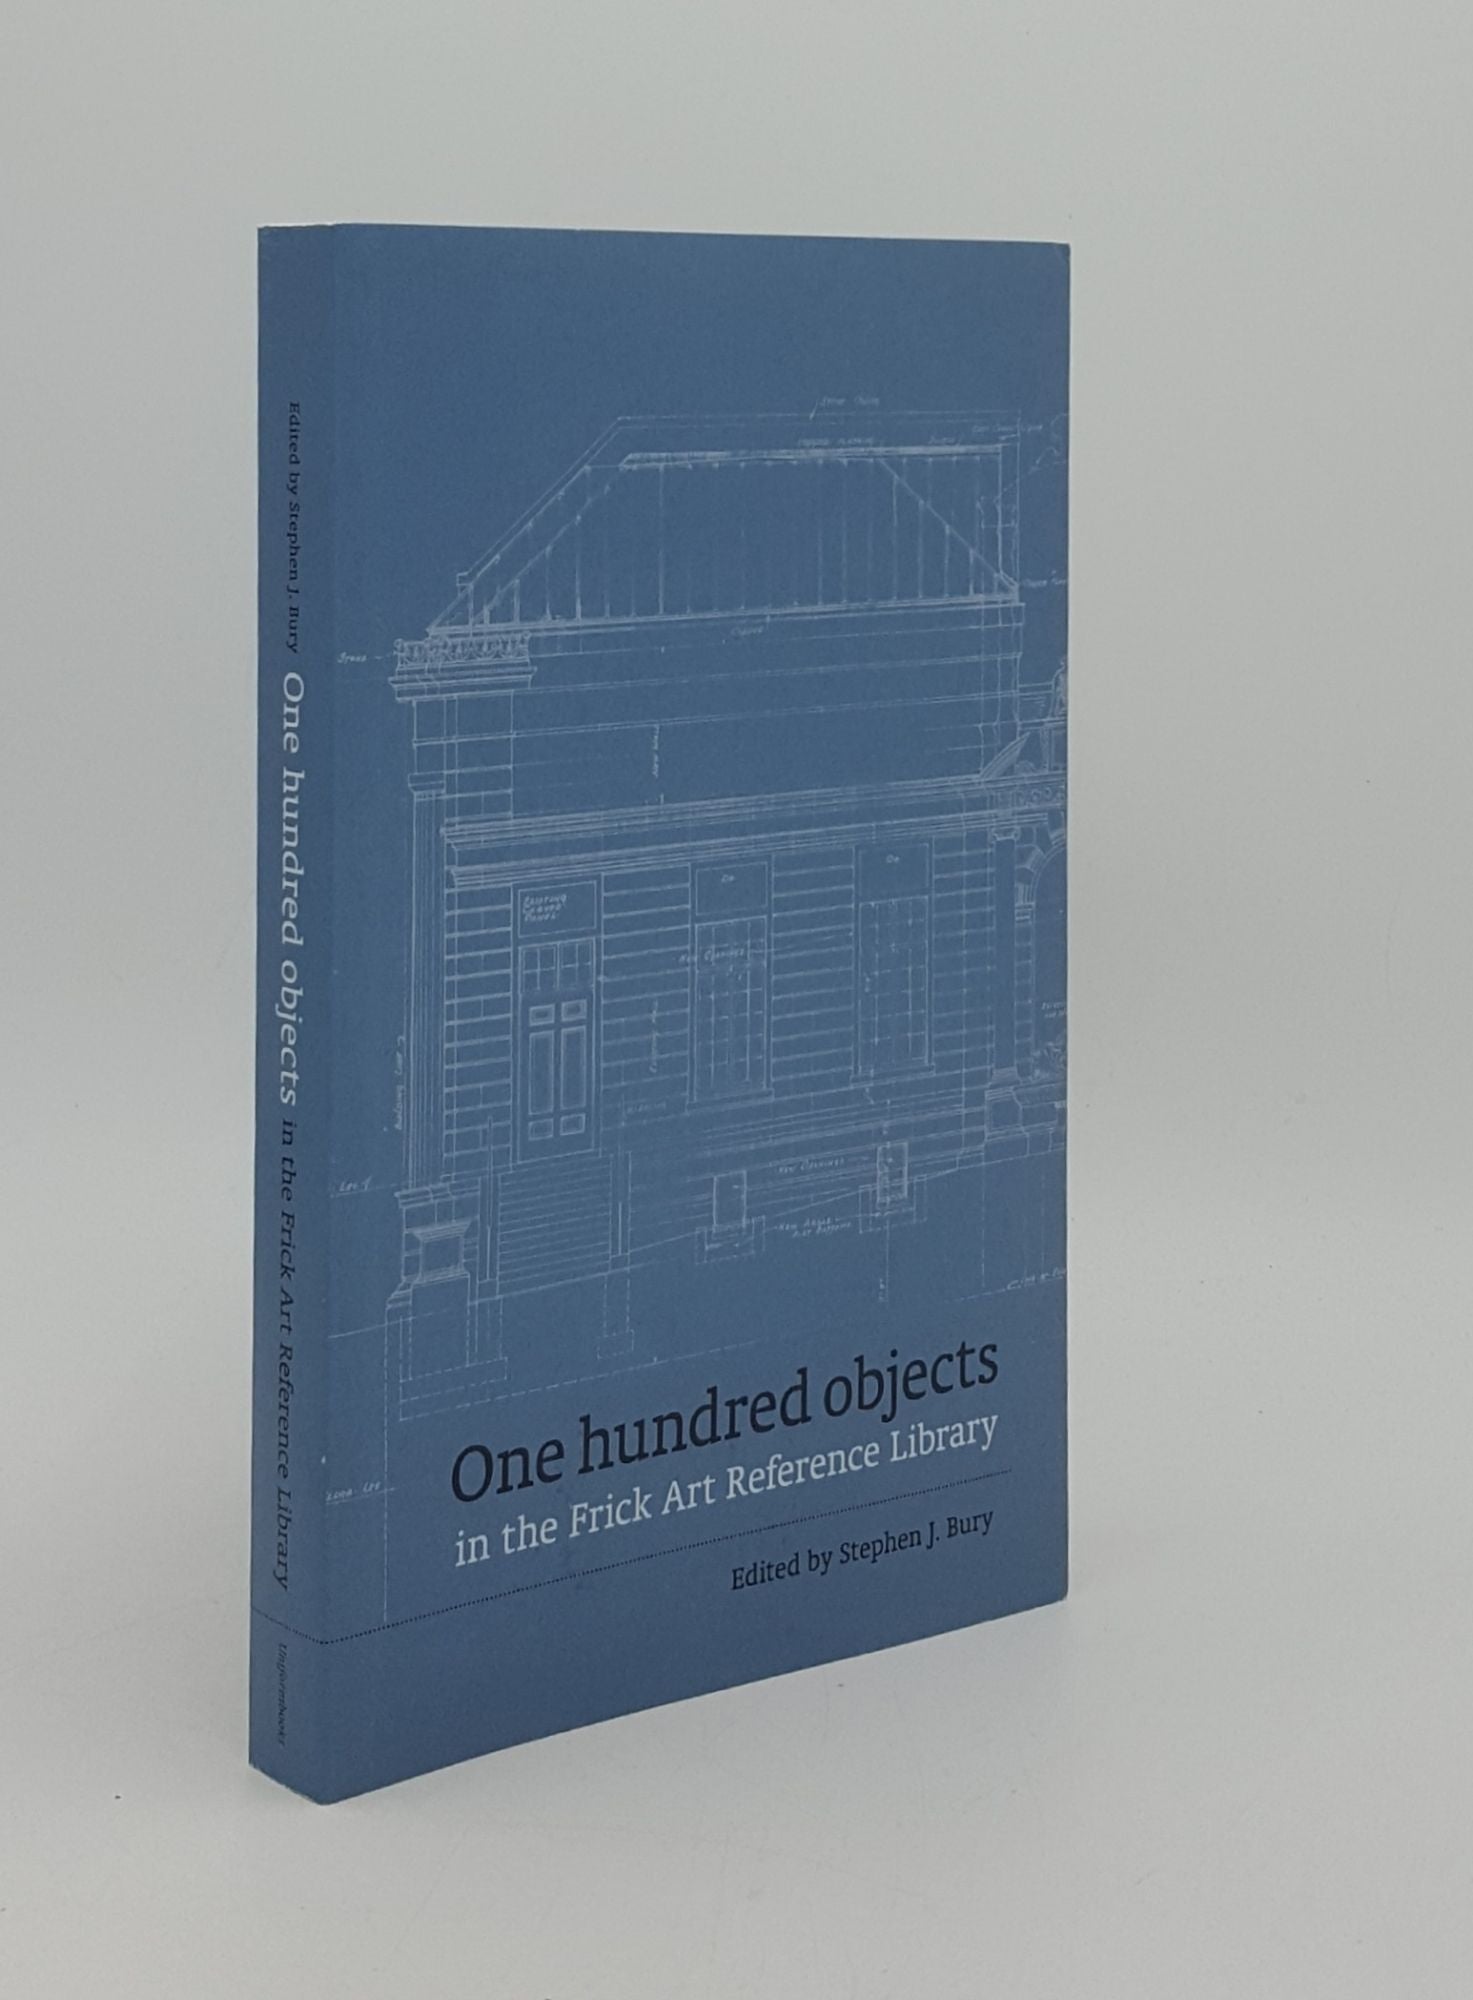 BURY Stephen J. - One Hundred Objects in the Frick Art Reference Library